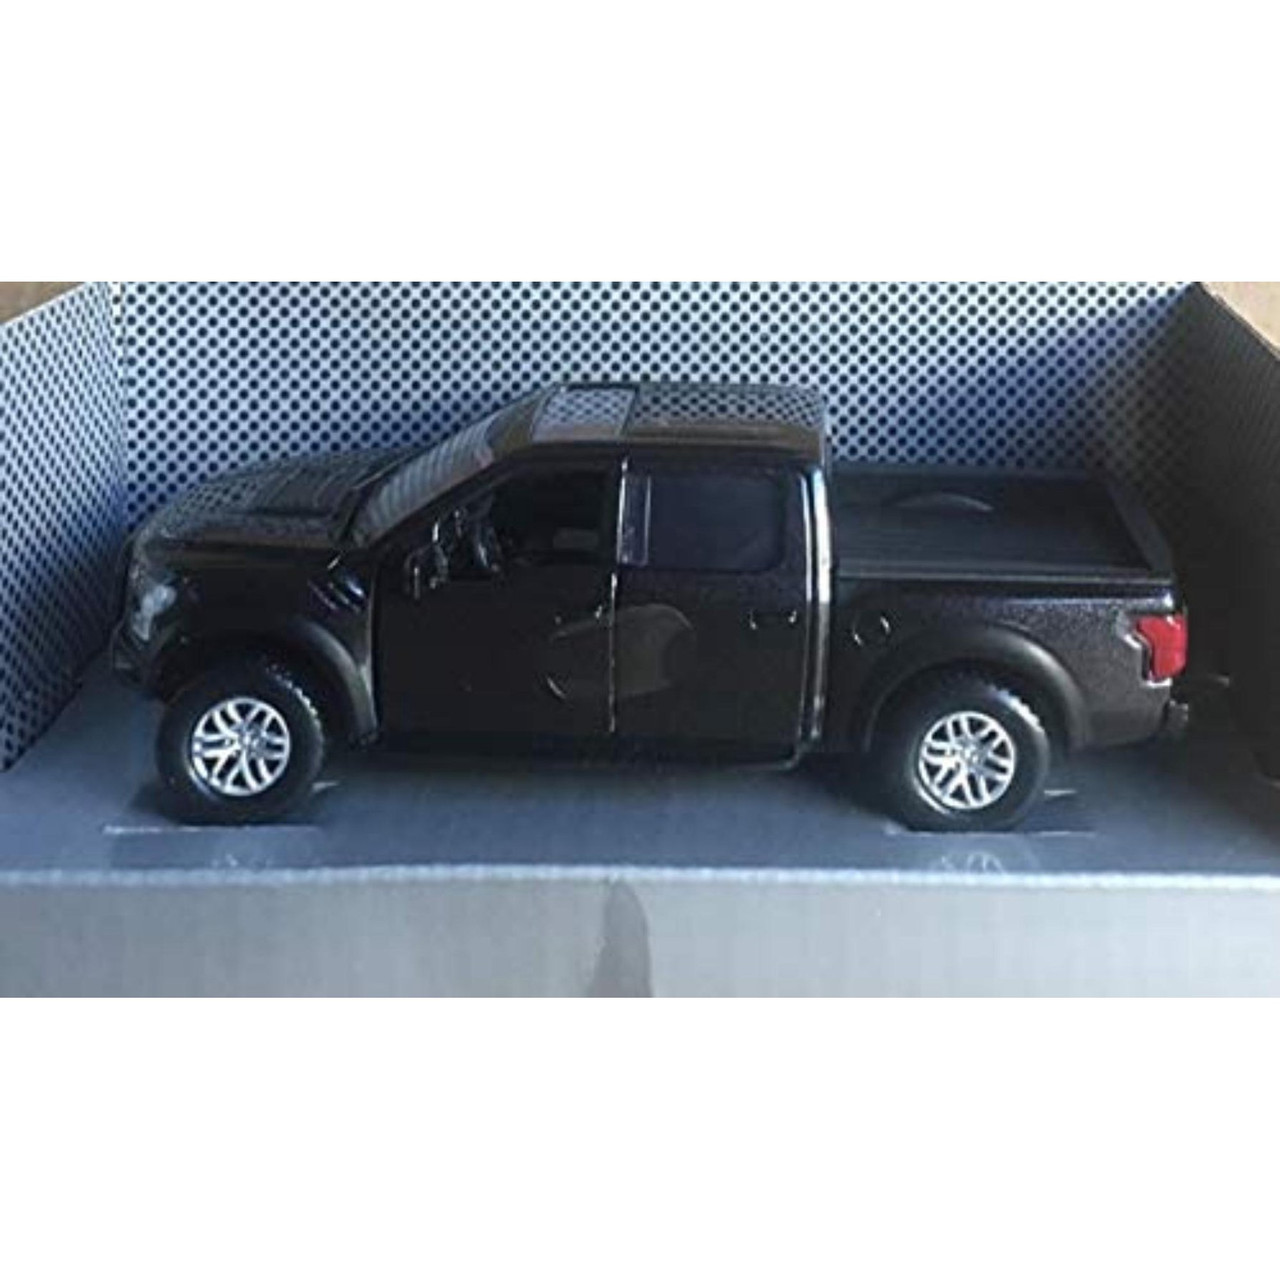 Motor Max American Legends Pull Back and Go 2017 Ford F-150 Raptor 4 1/2 Inches Long , Pick Up Truck Metallic Black